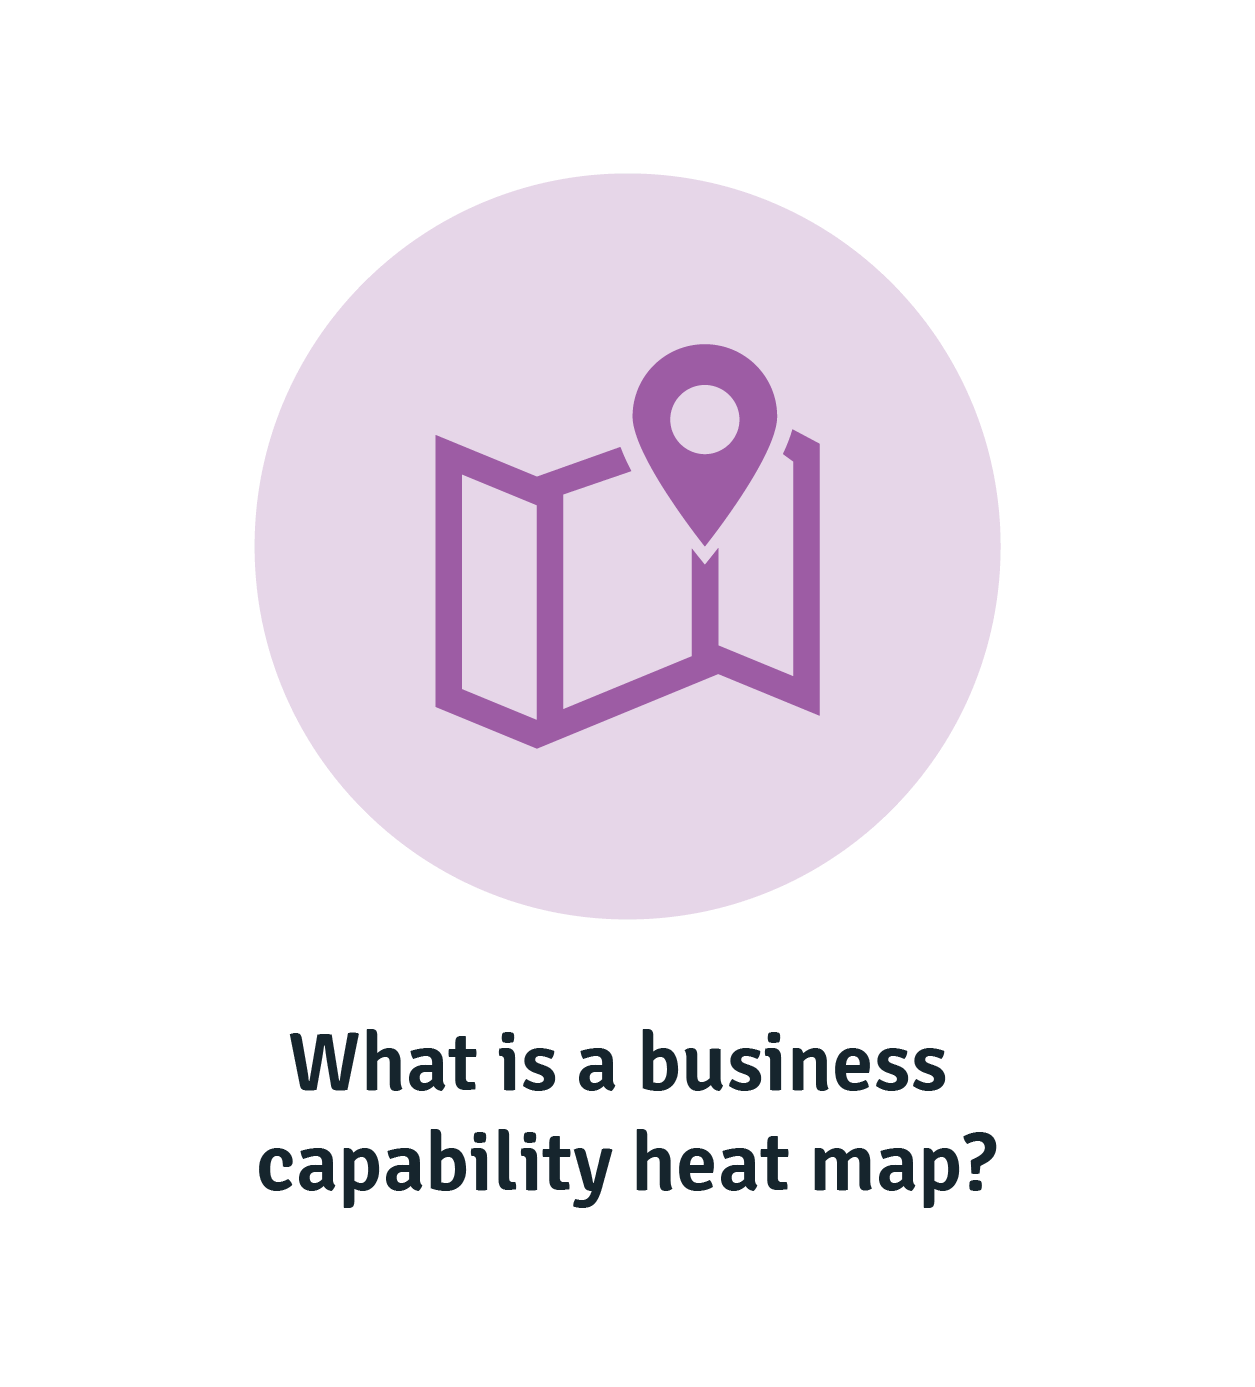 what is a business capability heat map?